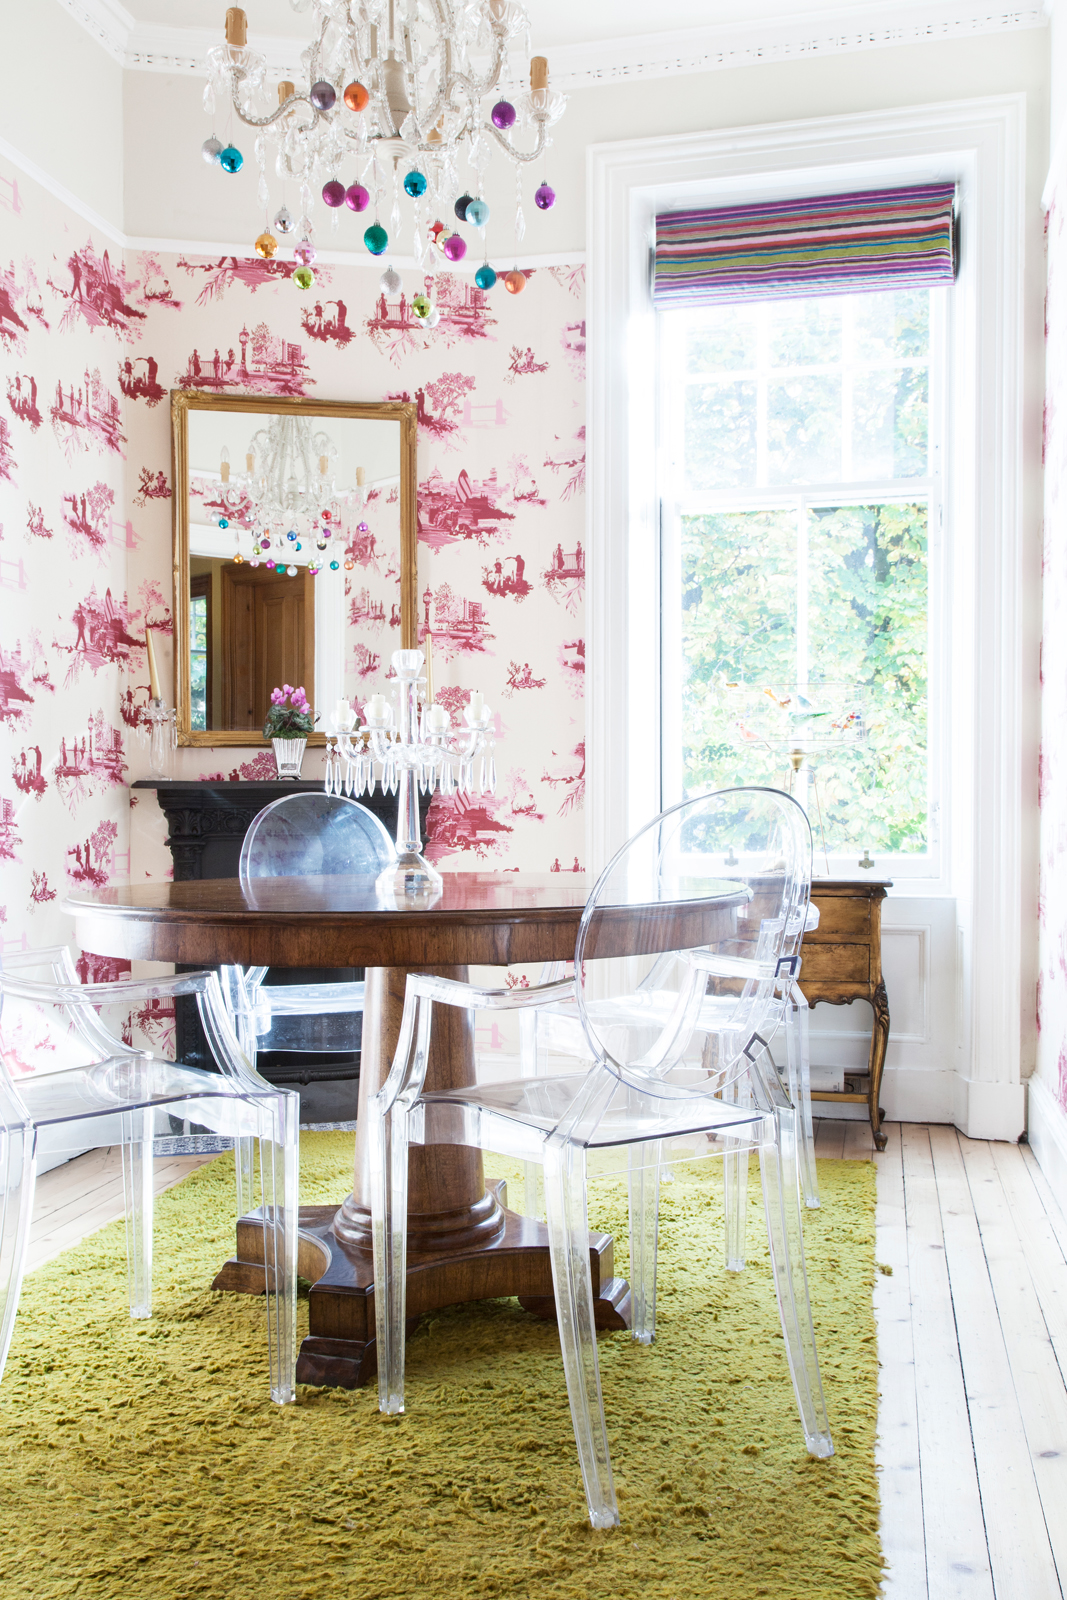 Perspex Ghost chairs: ALL the husband's idea/Photo: Susie Lowe